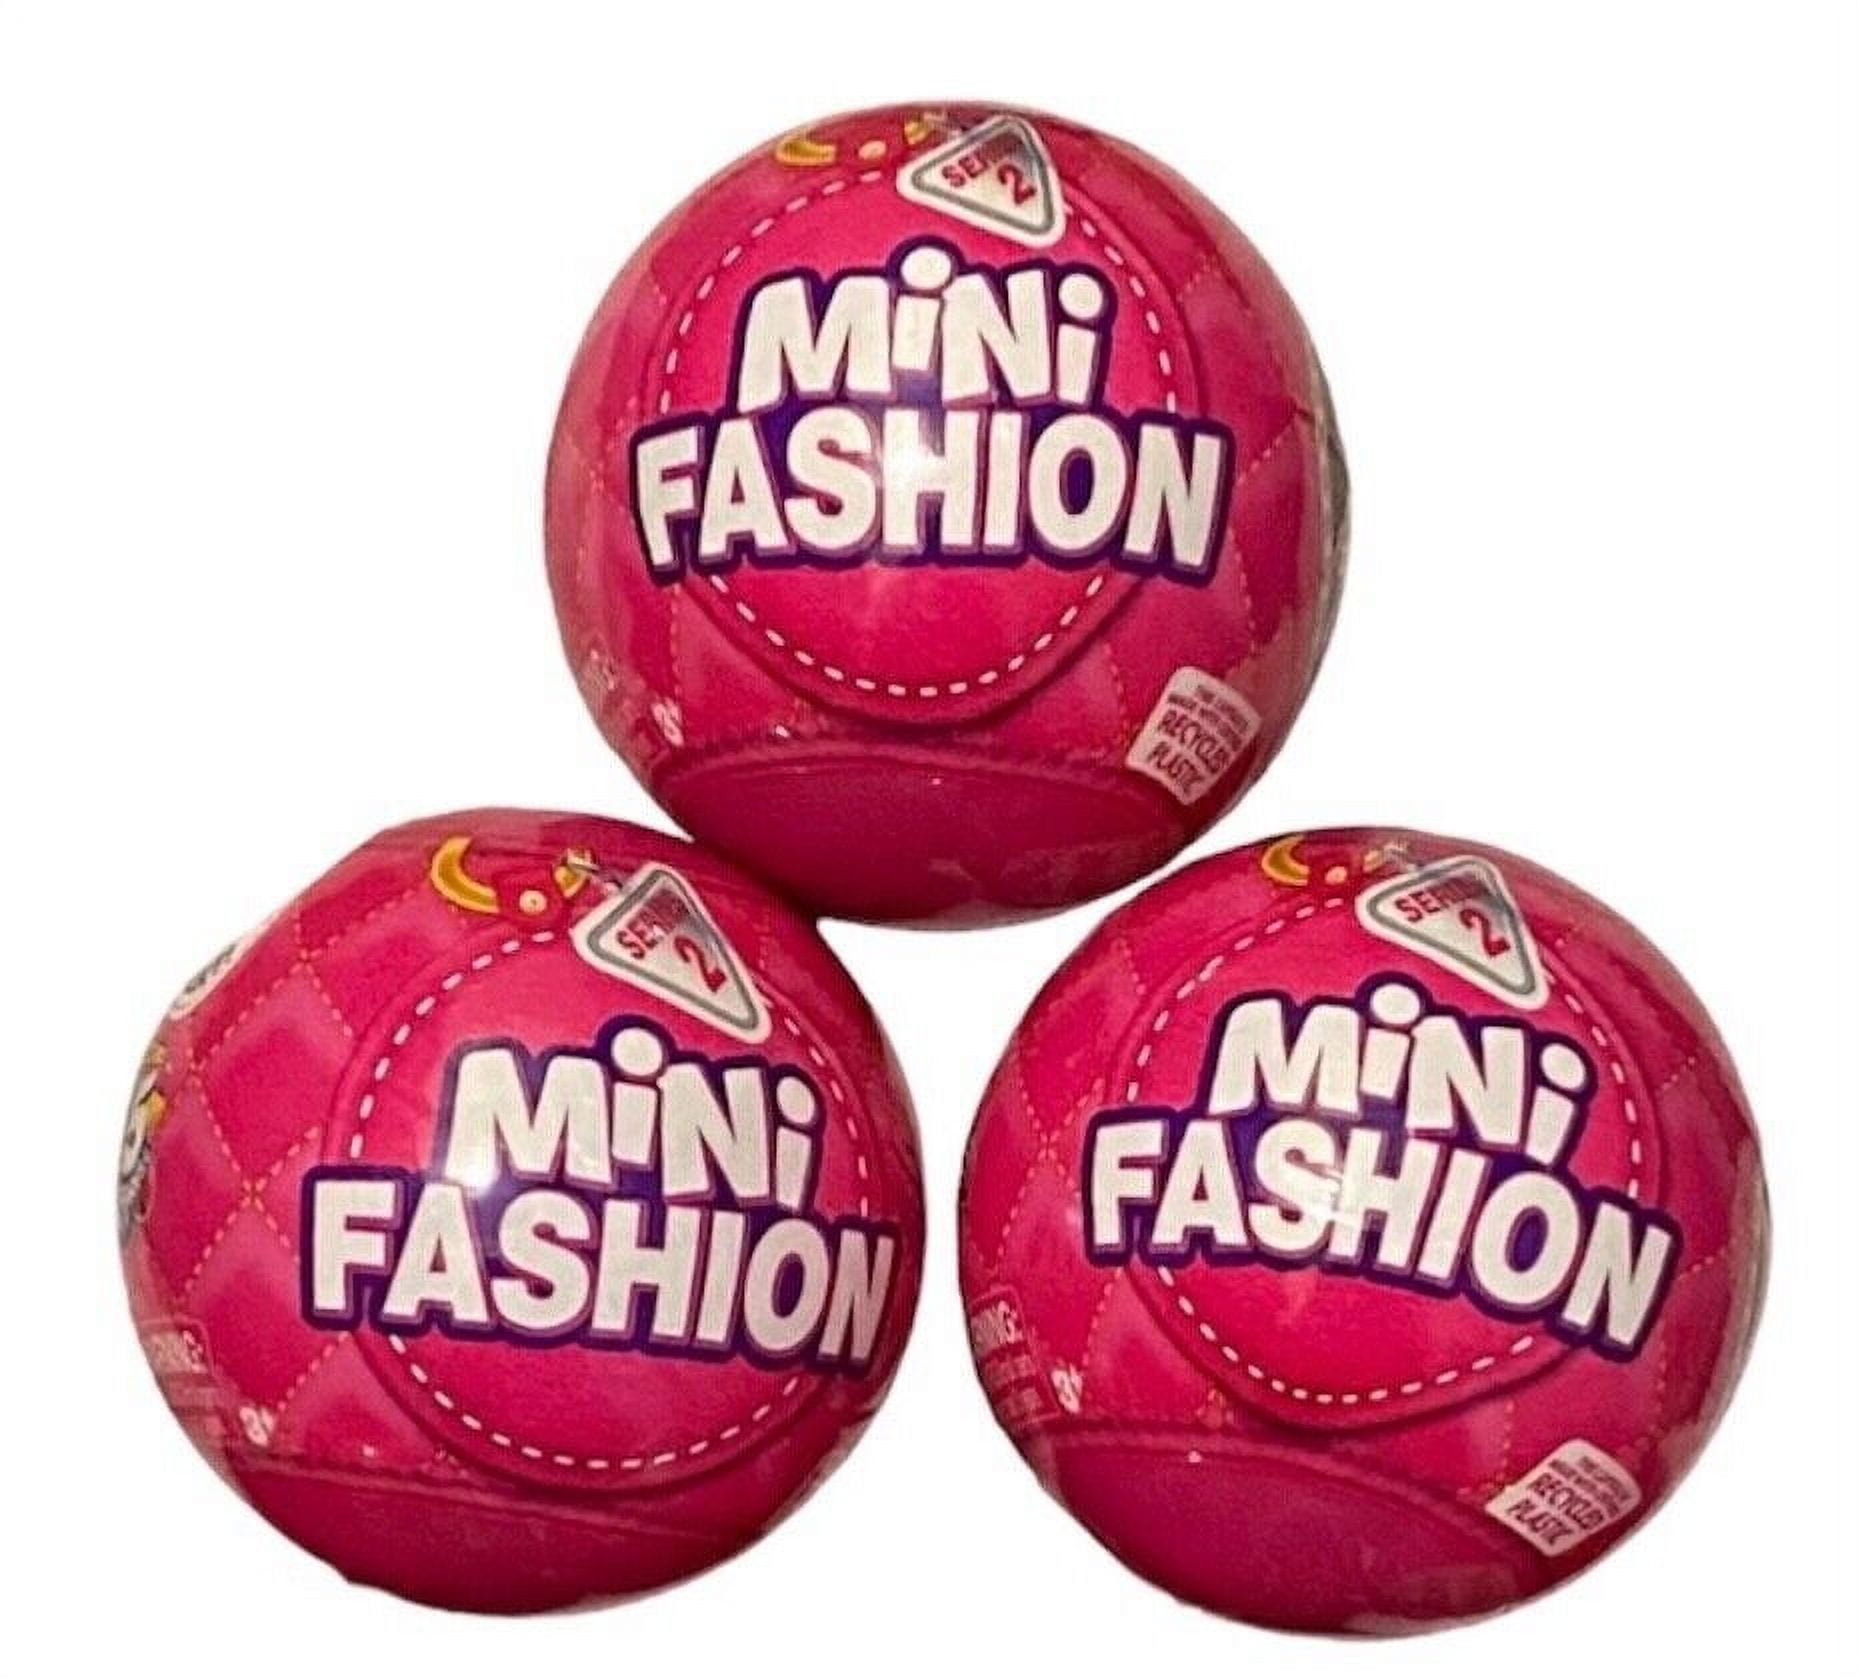 5 Surprise Mini Fashion  Exclusive Mystery Brand Collectibles by ZURU  (2 Pack), Multicolor (77246)